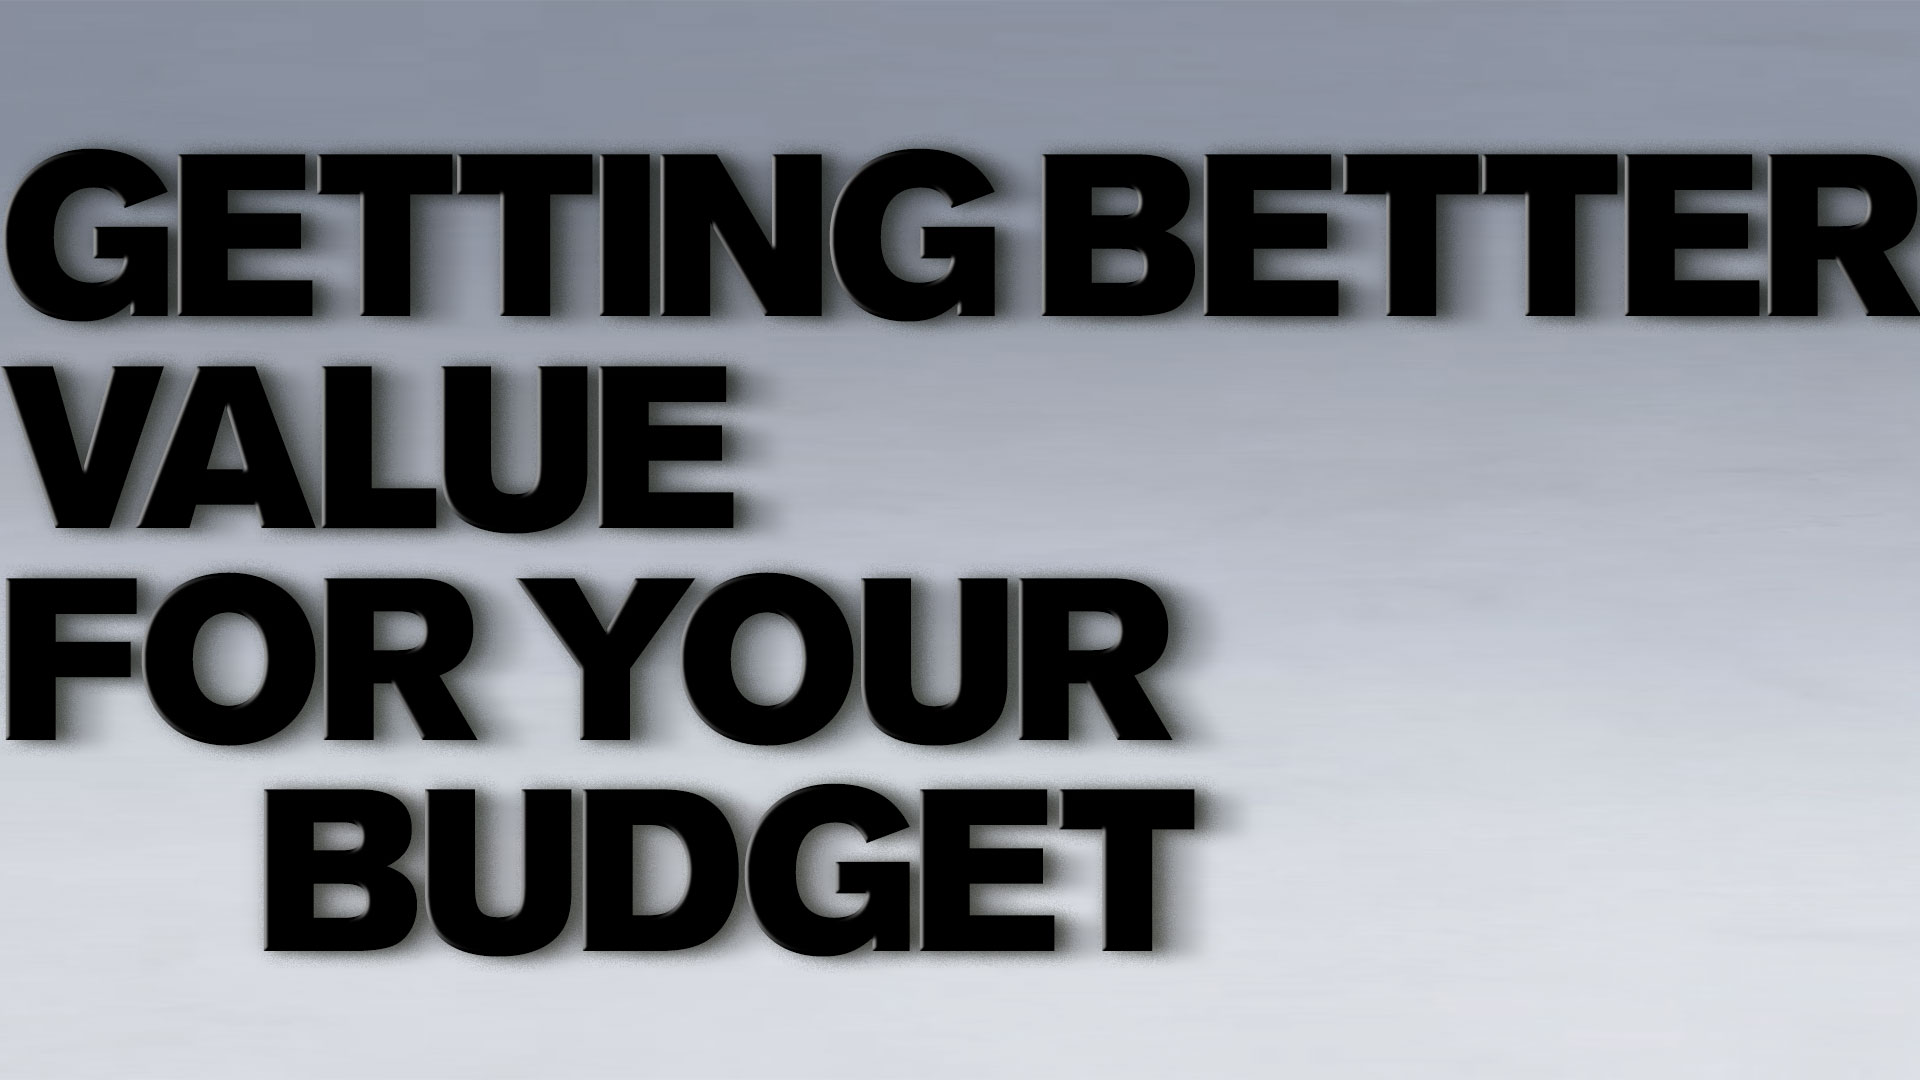 Getting-Better-Value-For-Your-Budget